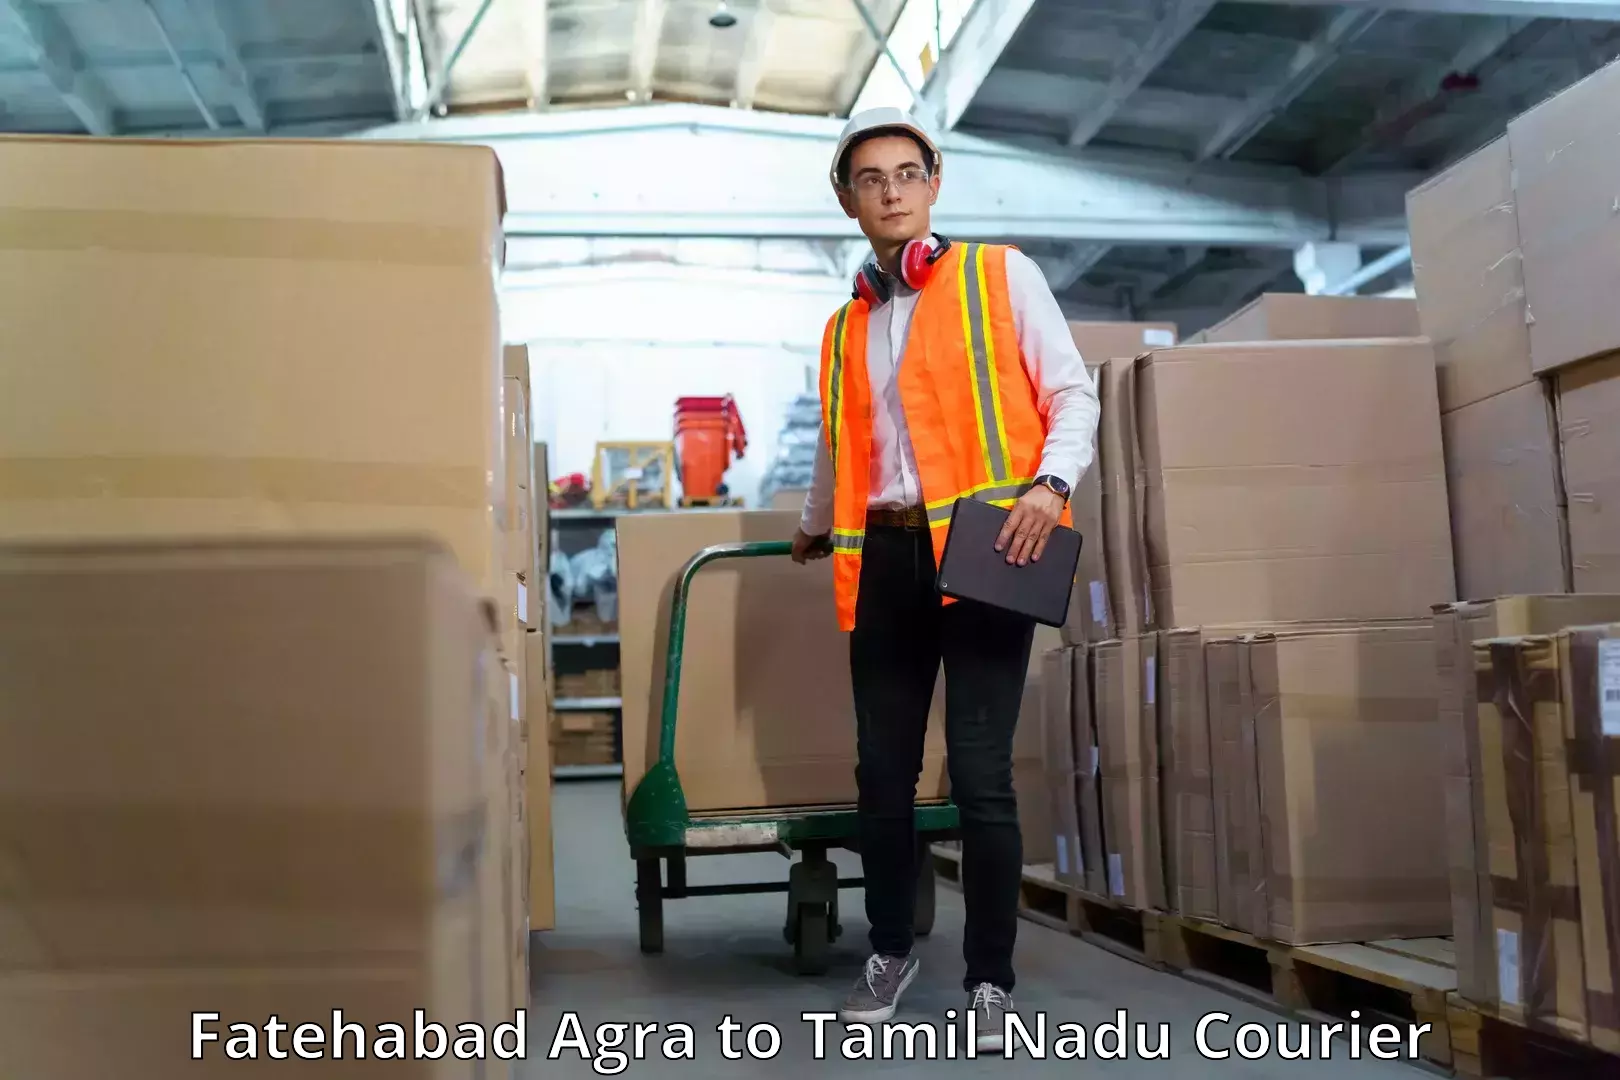 On-call courier service Fatehabad Agra to Coimbatore